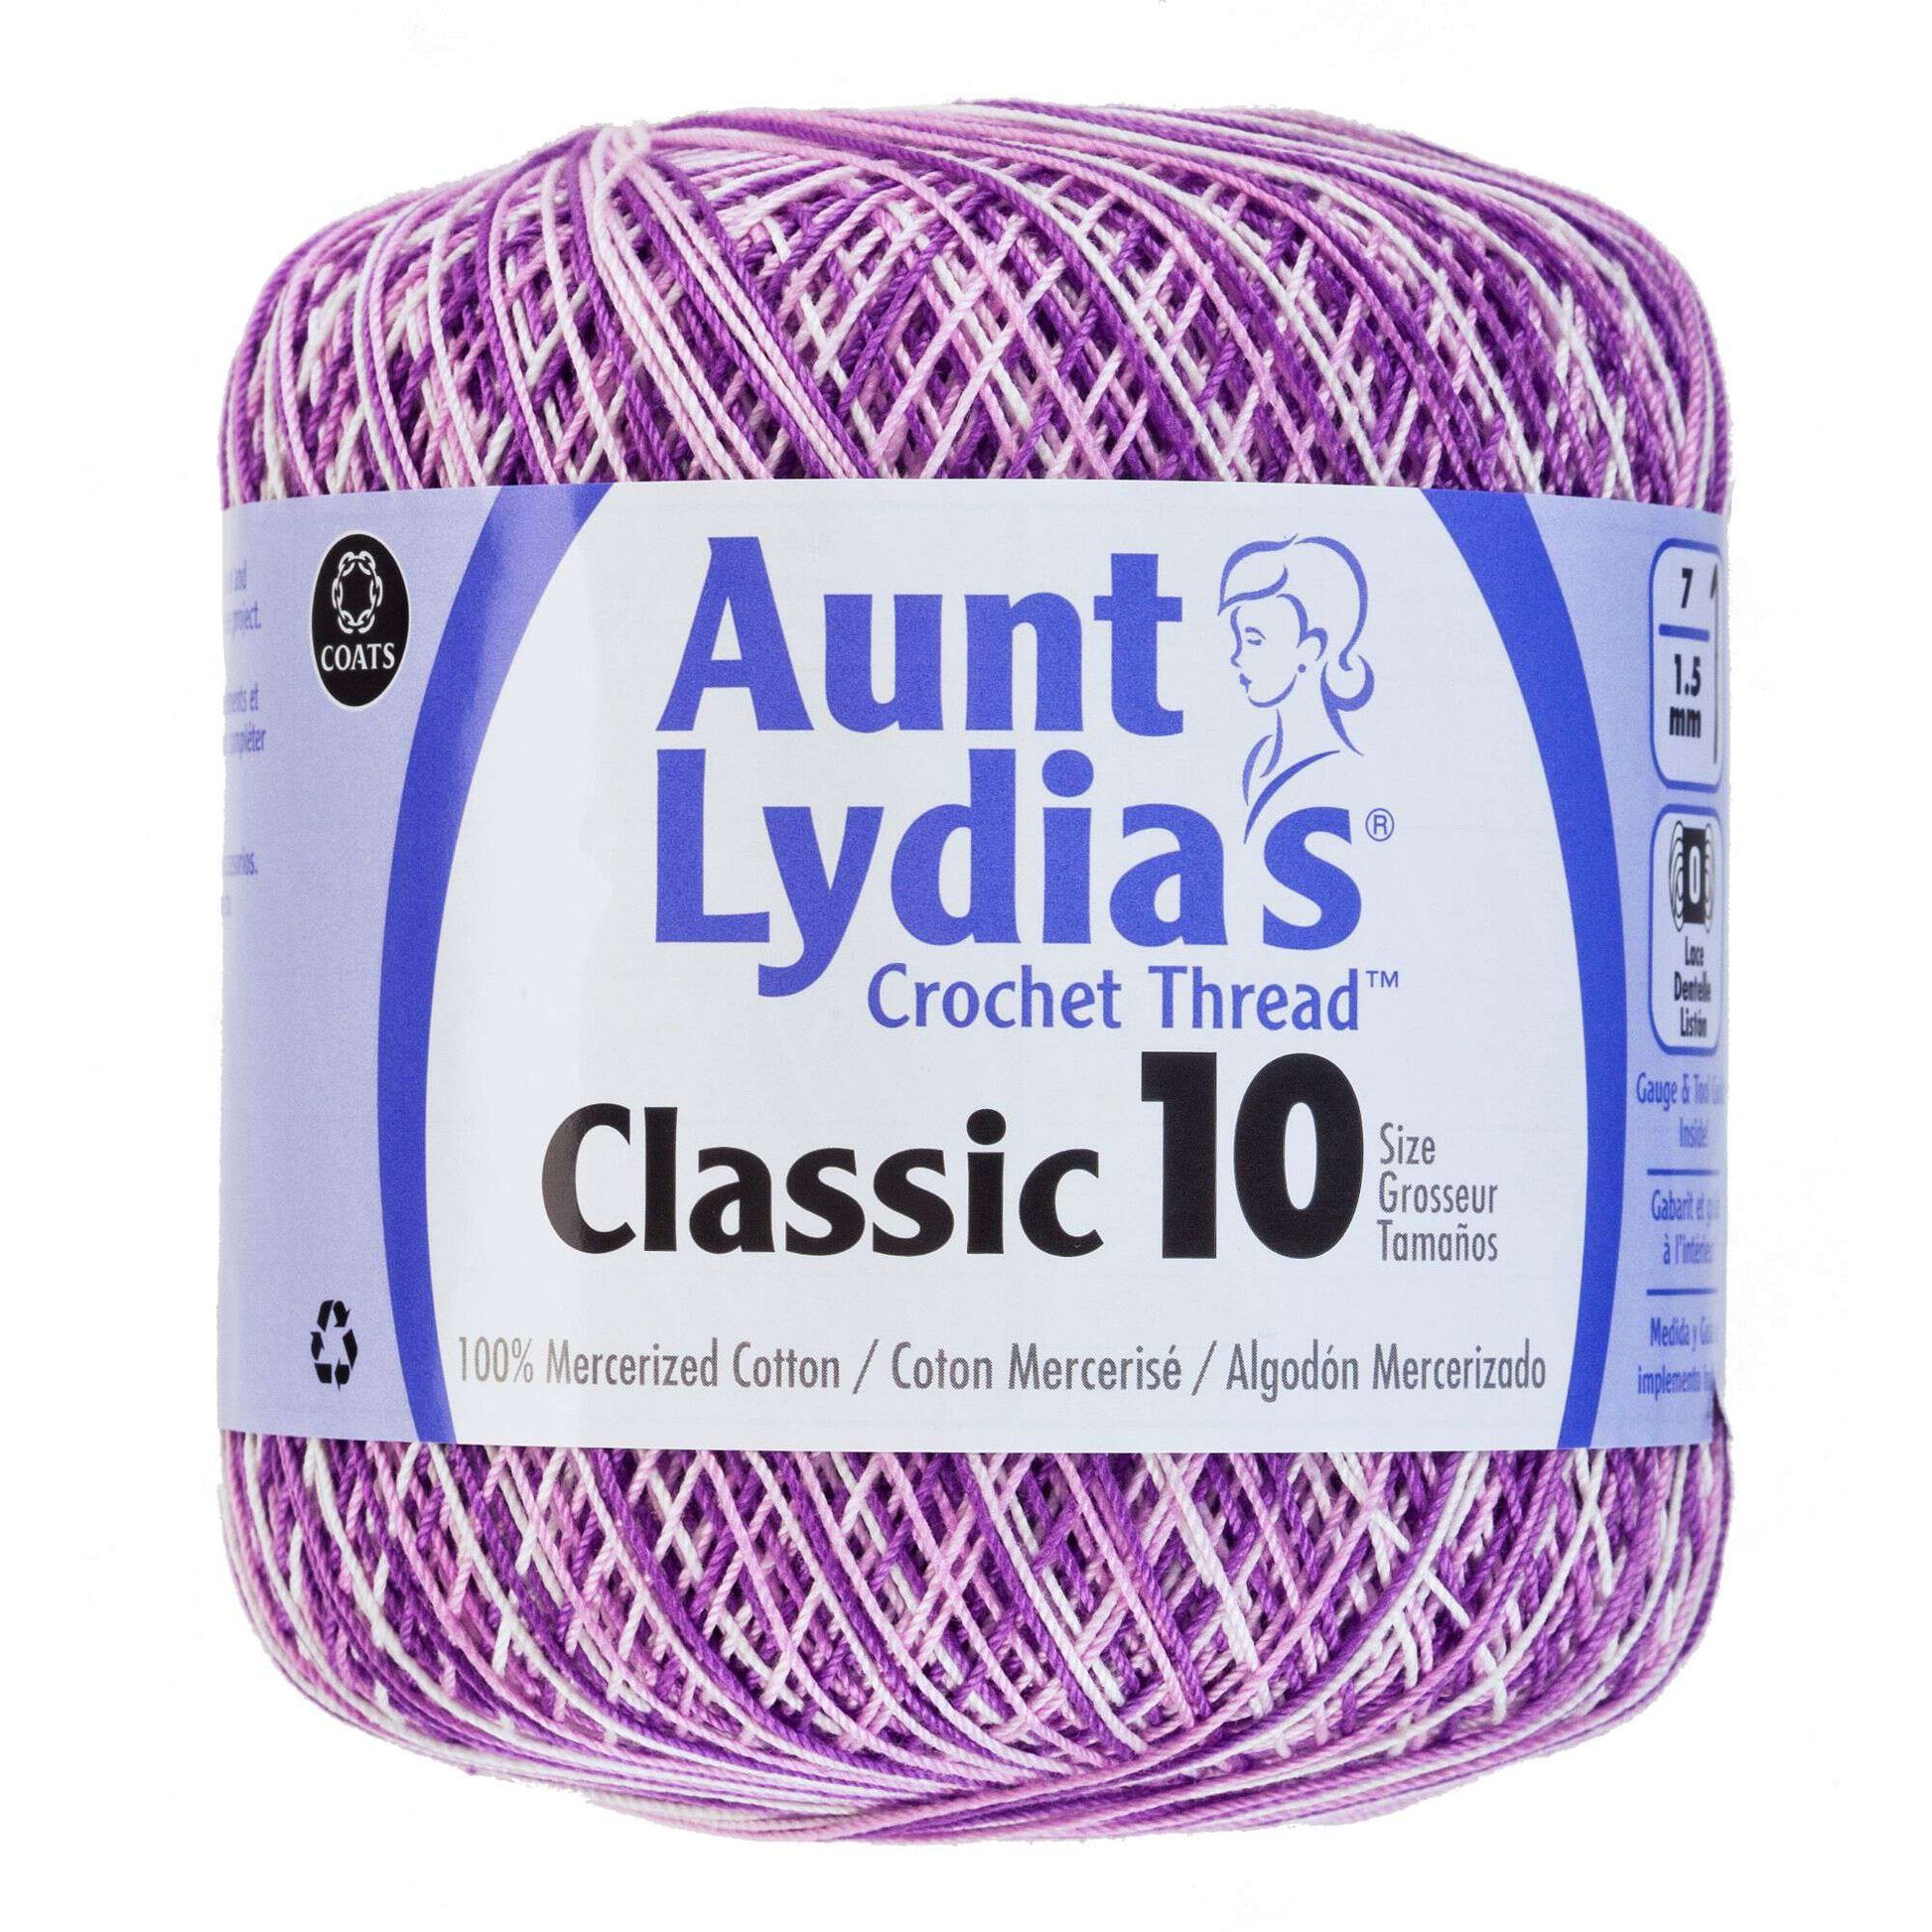 Aunt Lydia's Classic Crochet Thread Size 10 Shaded Purples